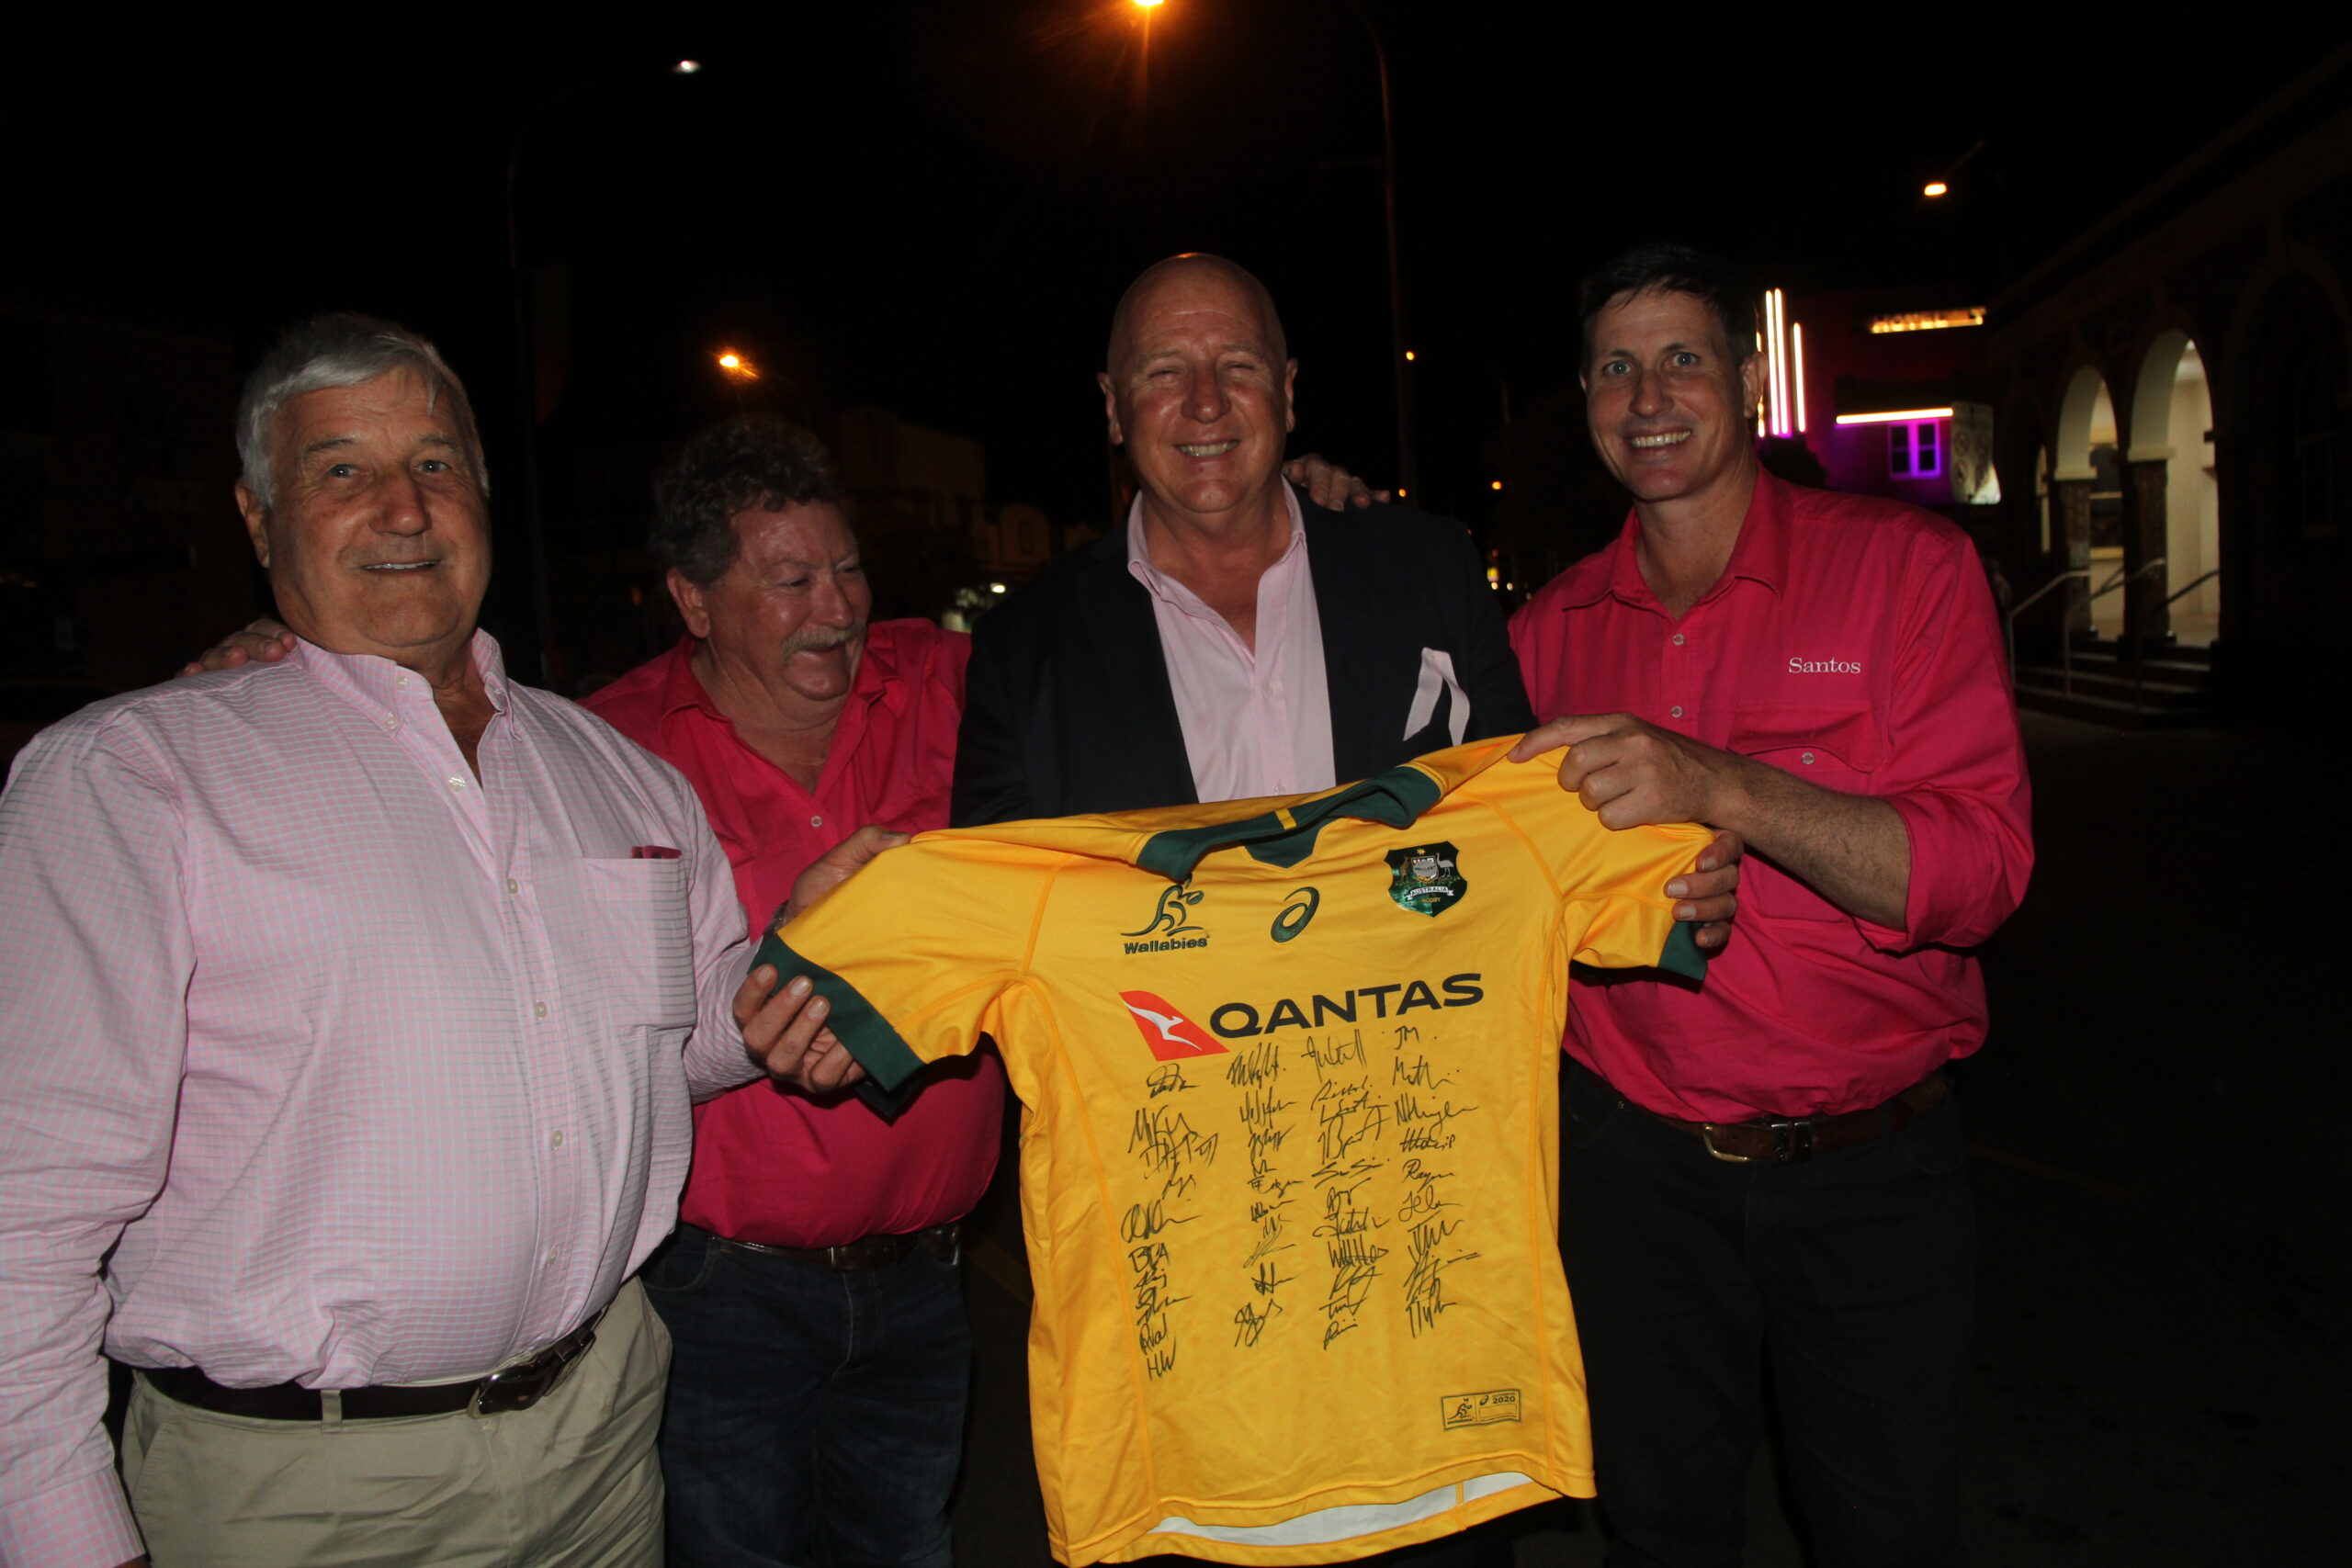 Joint buyers of the Wallabies football jersey auction item, Cr Ron Campey and the mayor Ron Campbell, with auctioneer Rob Gilbert who took the top bid to $1000 for the jersey, the highest auction price on the night. The Wallabies jersey, signed by all the team members, was donated by Santos and presented by Santos regional manager Andrew Snars.